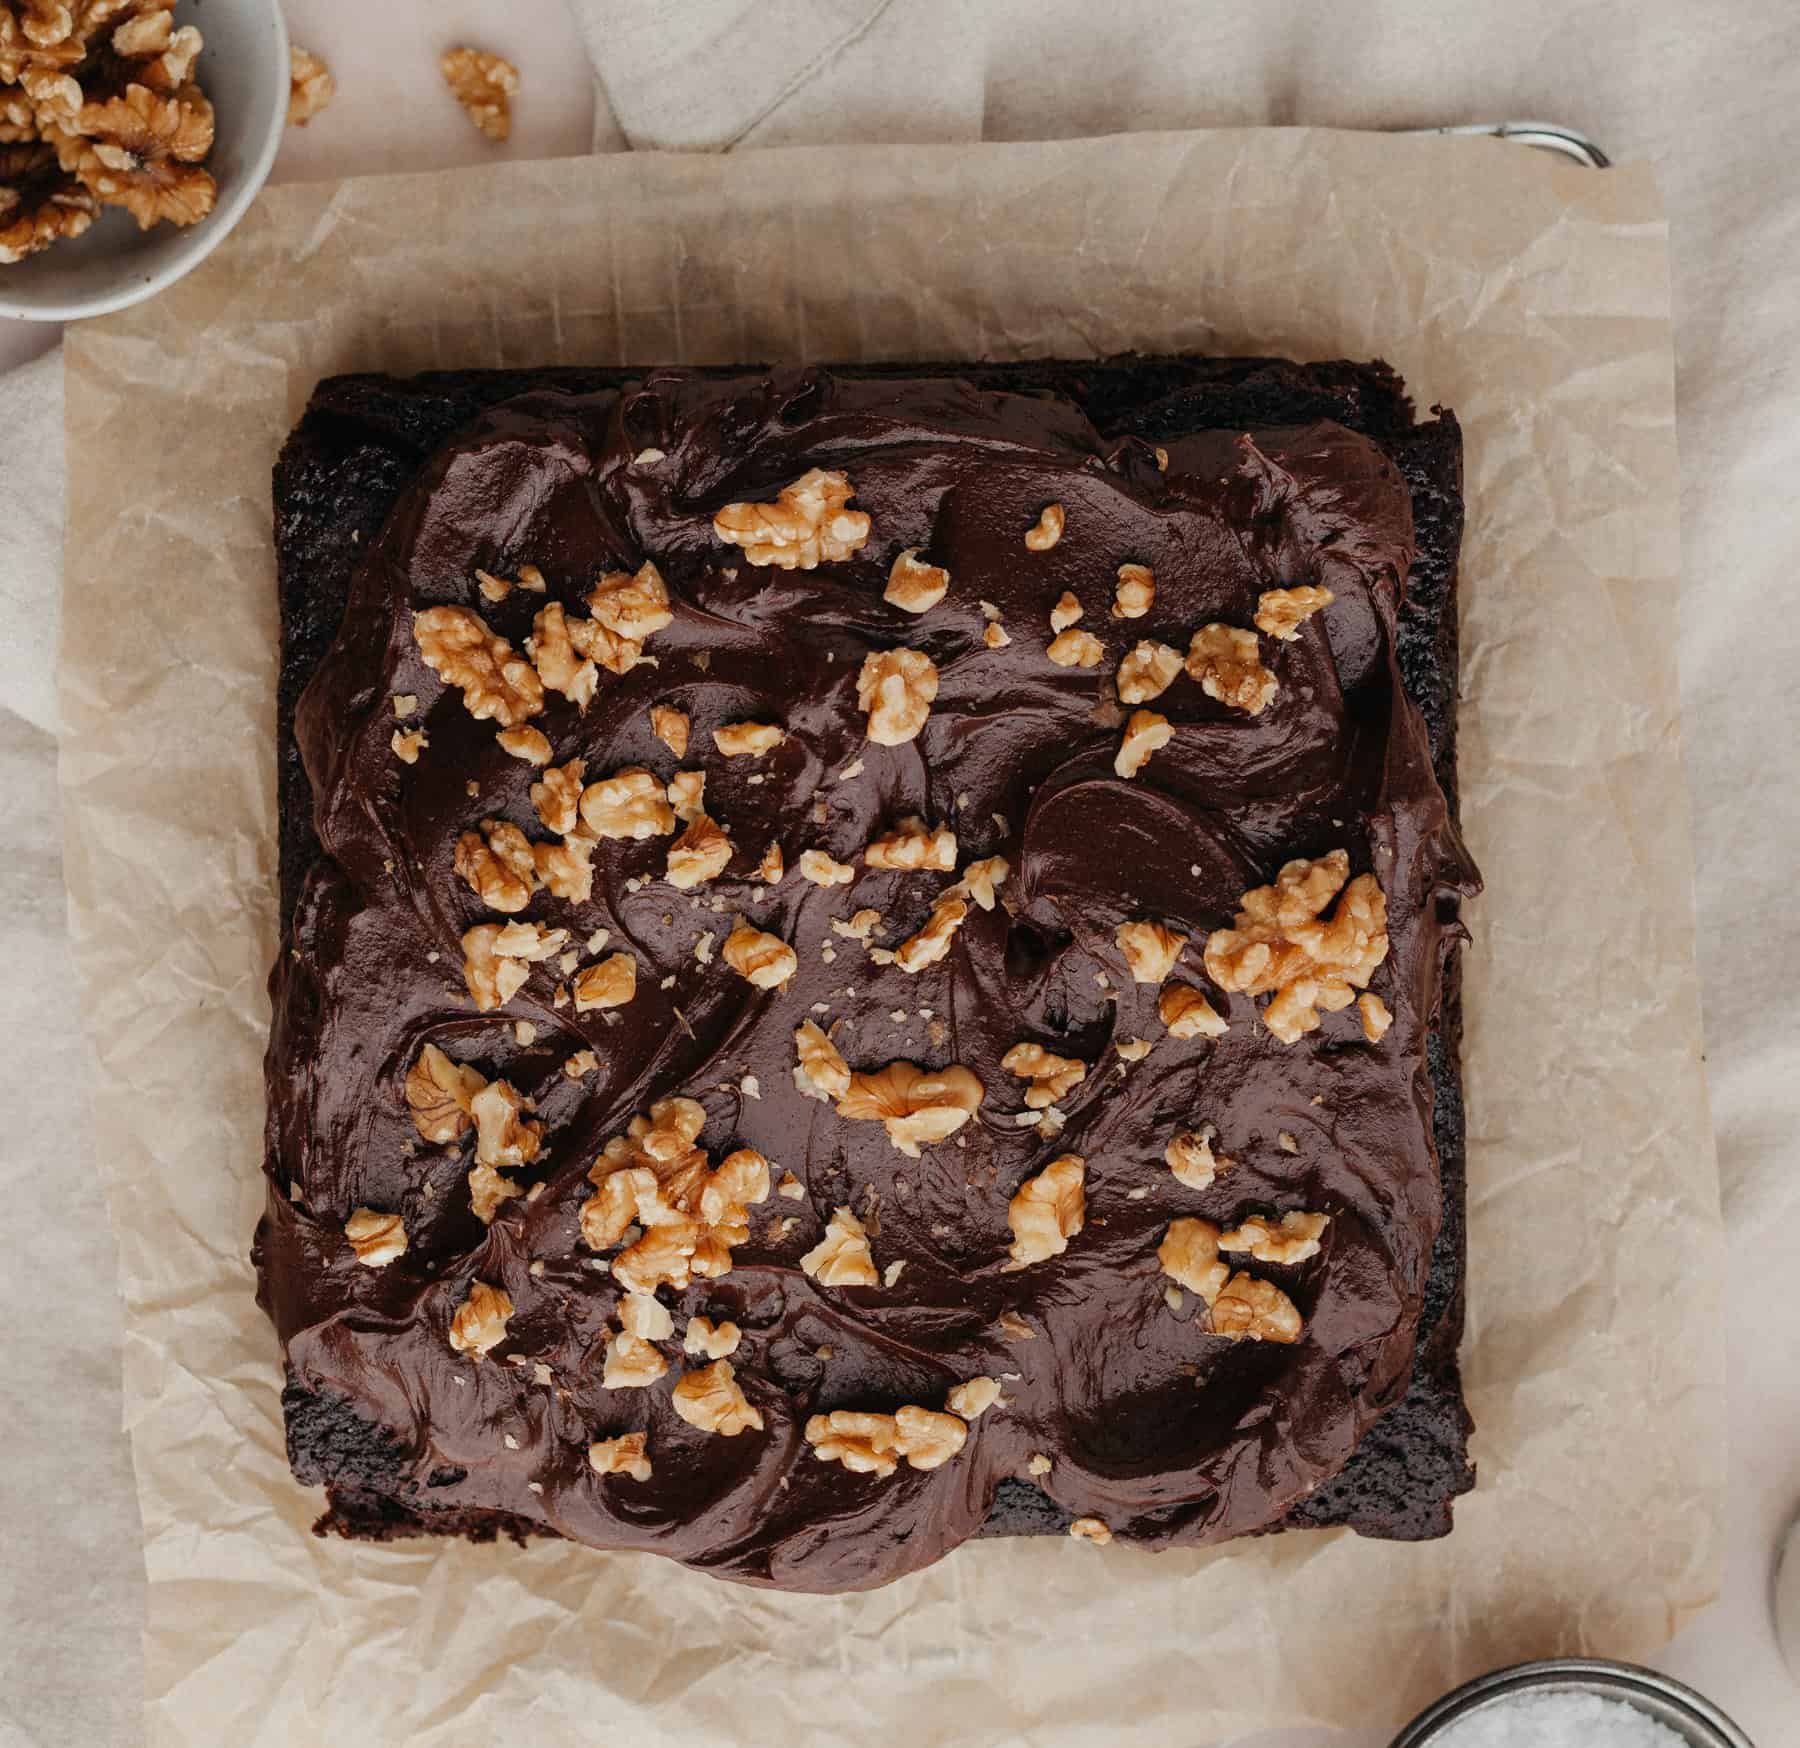 A square chocolate walnut cake on brown parchment paper